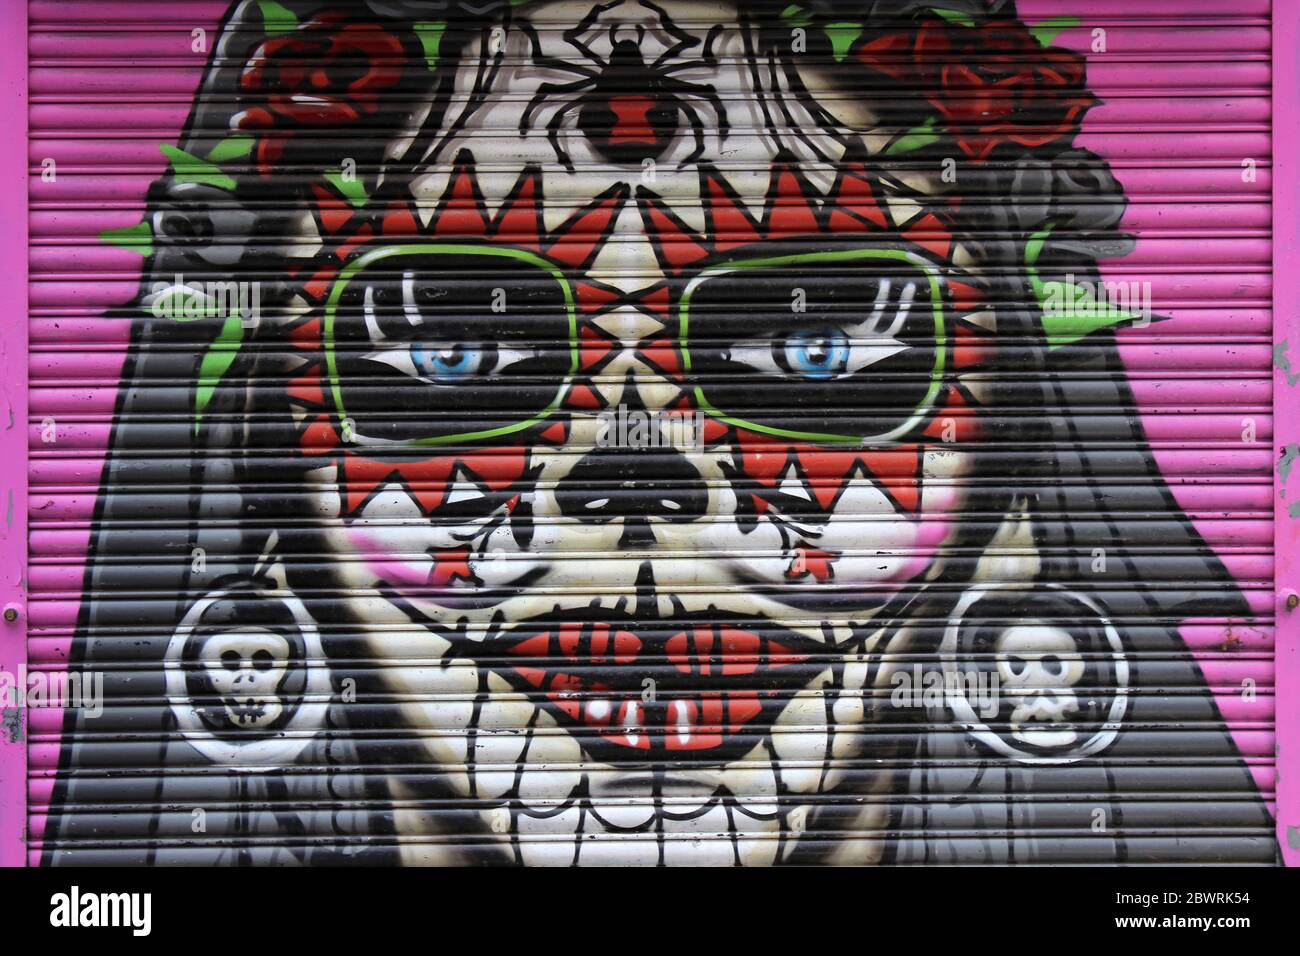 Mexican Day Of The Dead Artwork On A Street Shutter Stock Photo